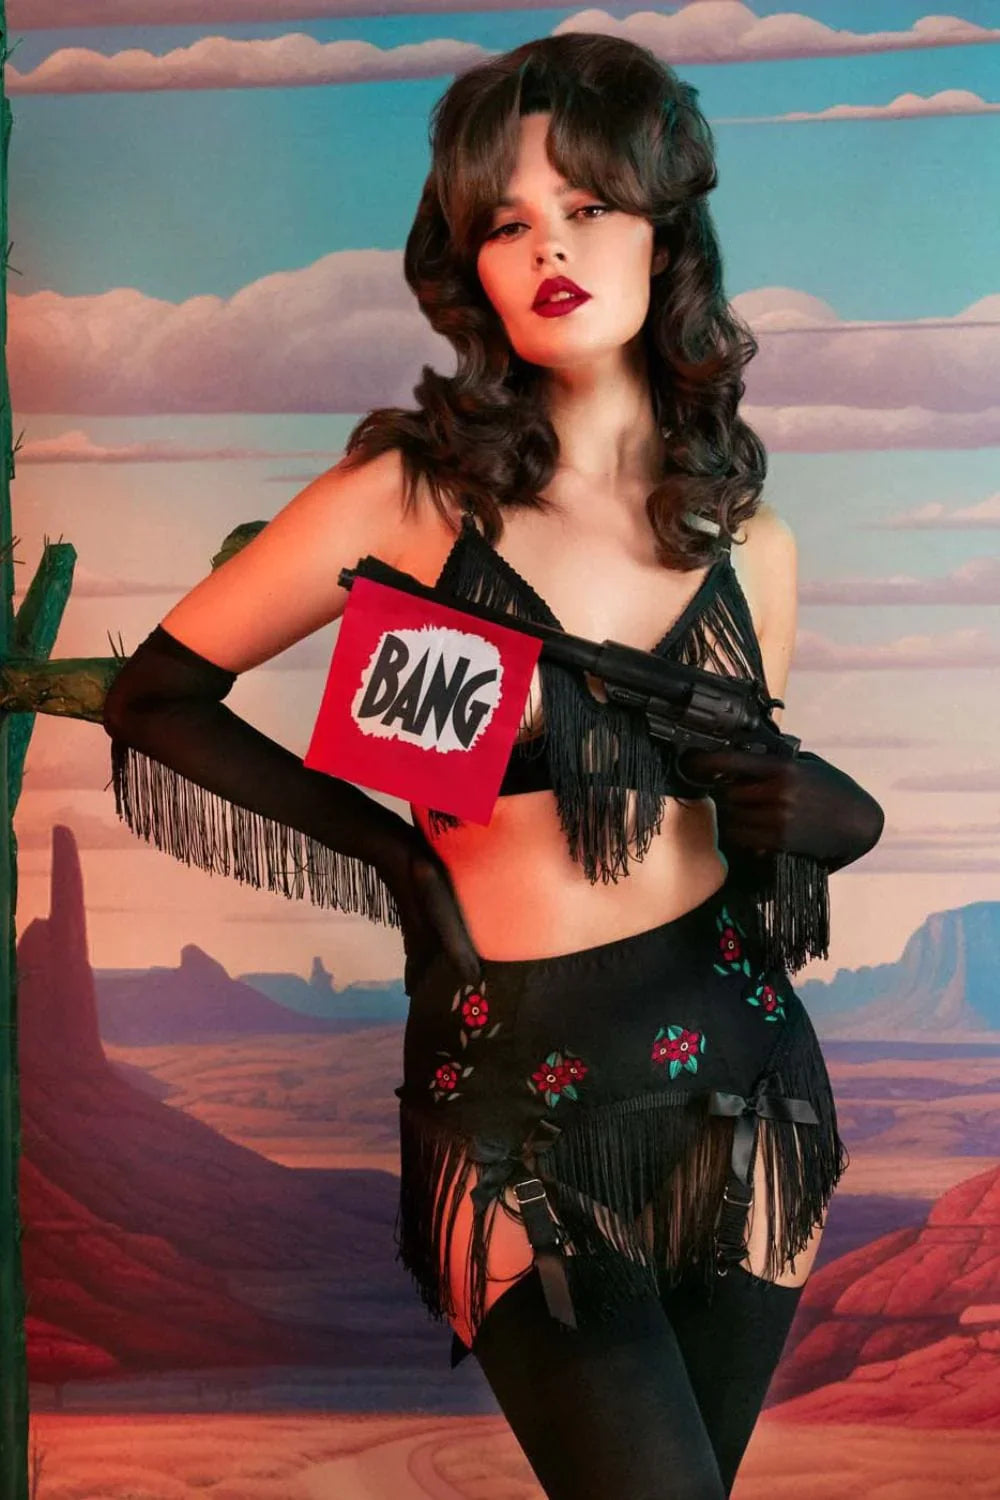 Bettie Page Lingerie Mabel Western Floral Embroidery And Fringe Suspender Belt